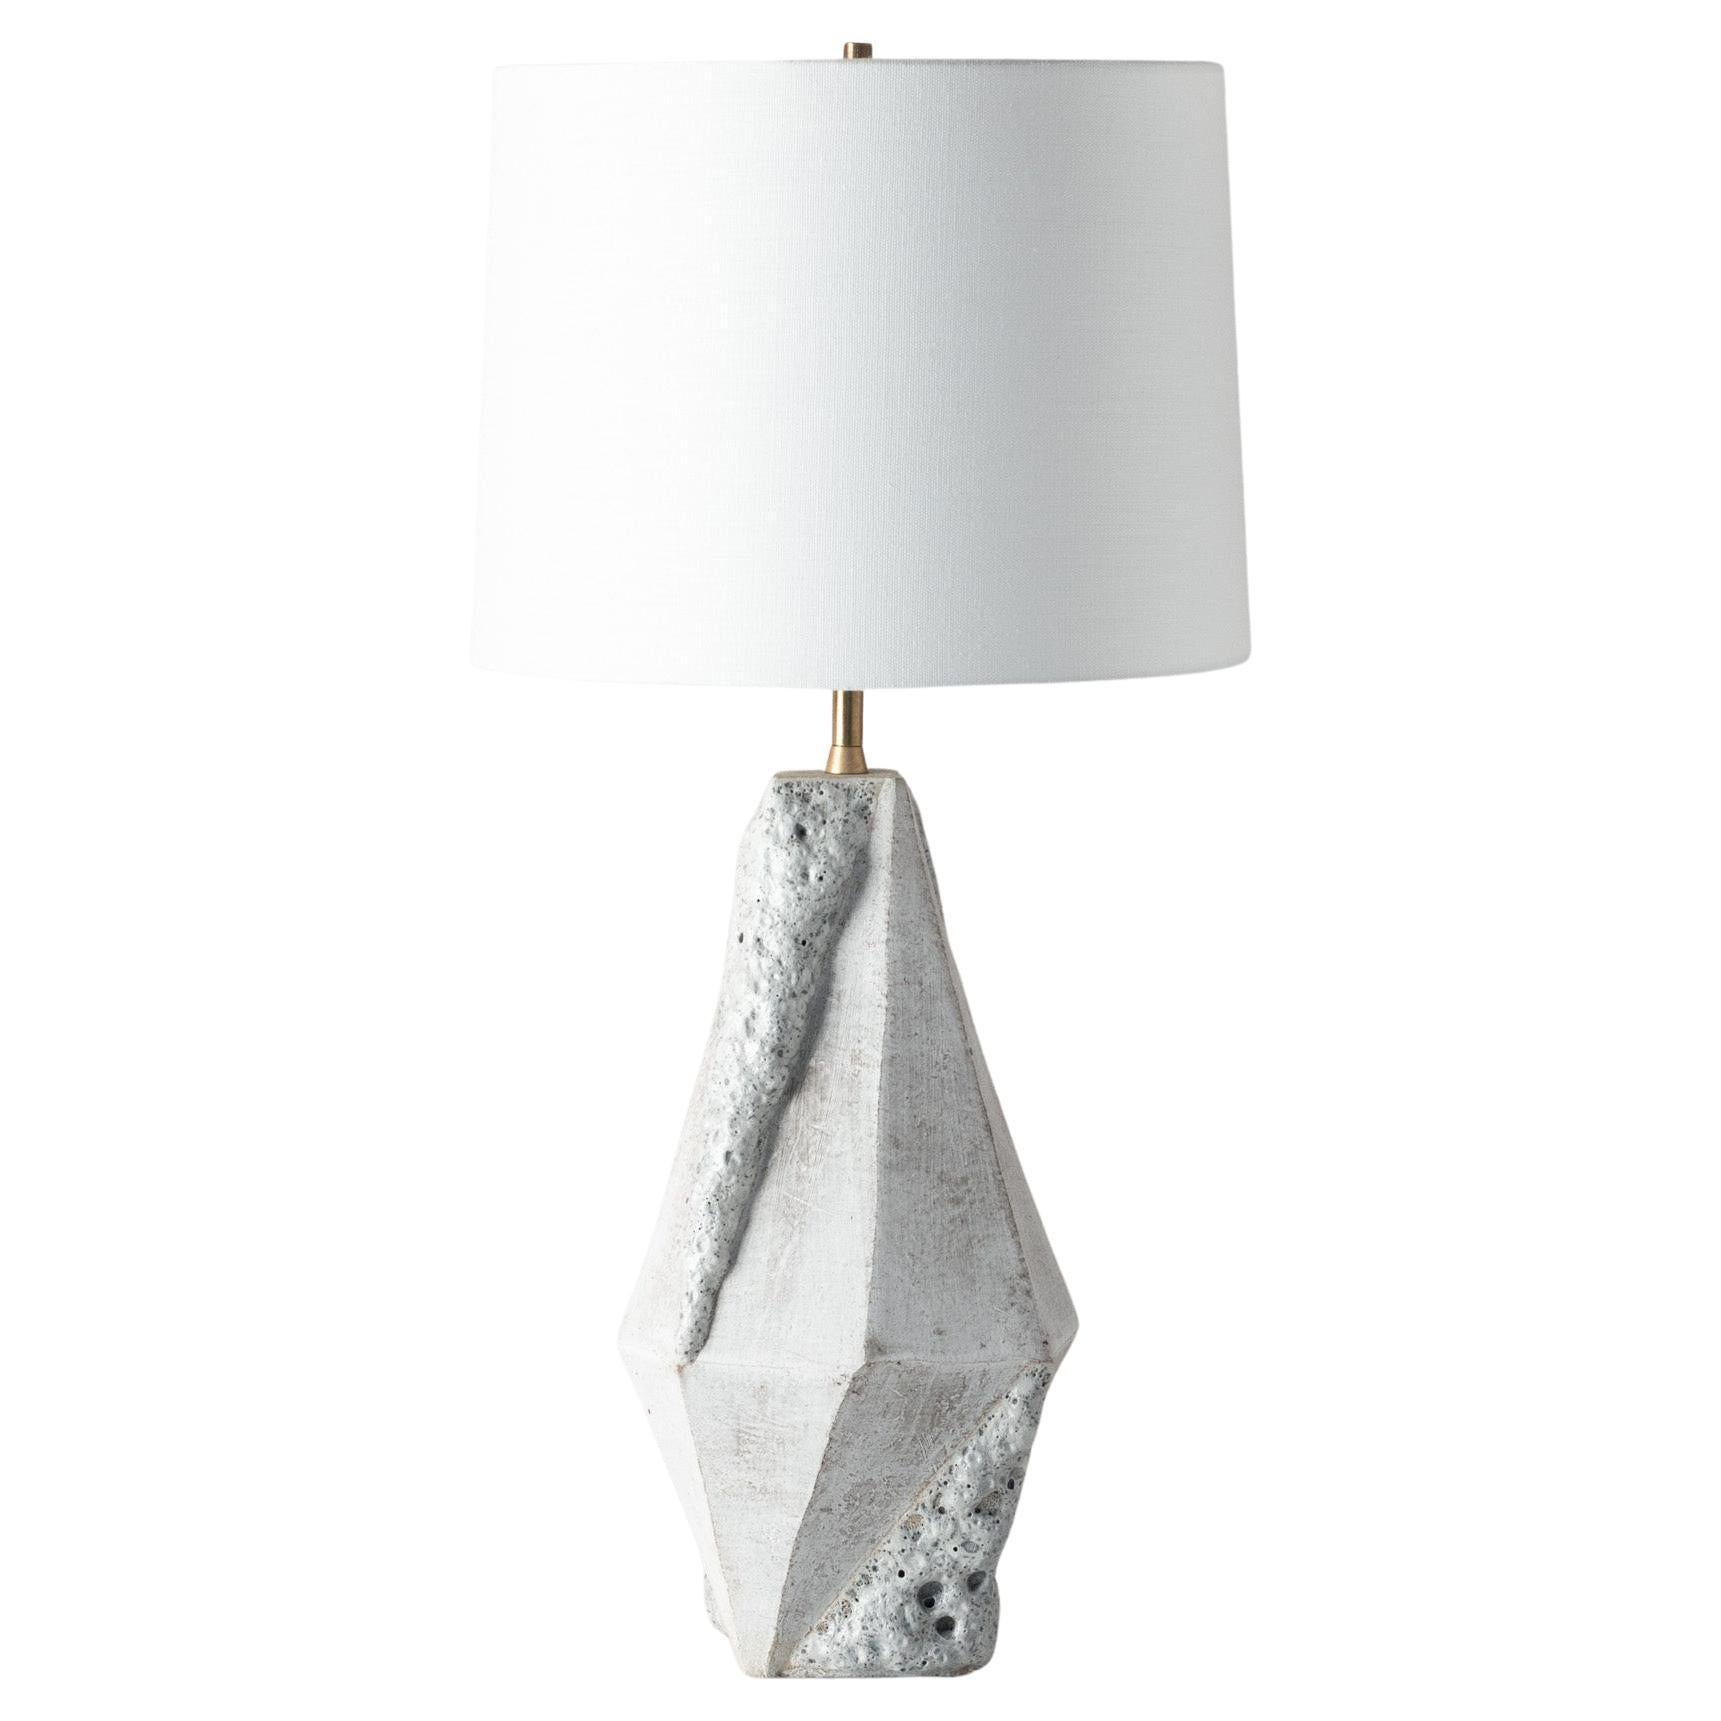 Warp - Small Geometric Matte and Textured White Ceramic Table Lamp For Sale